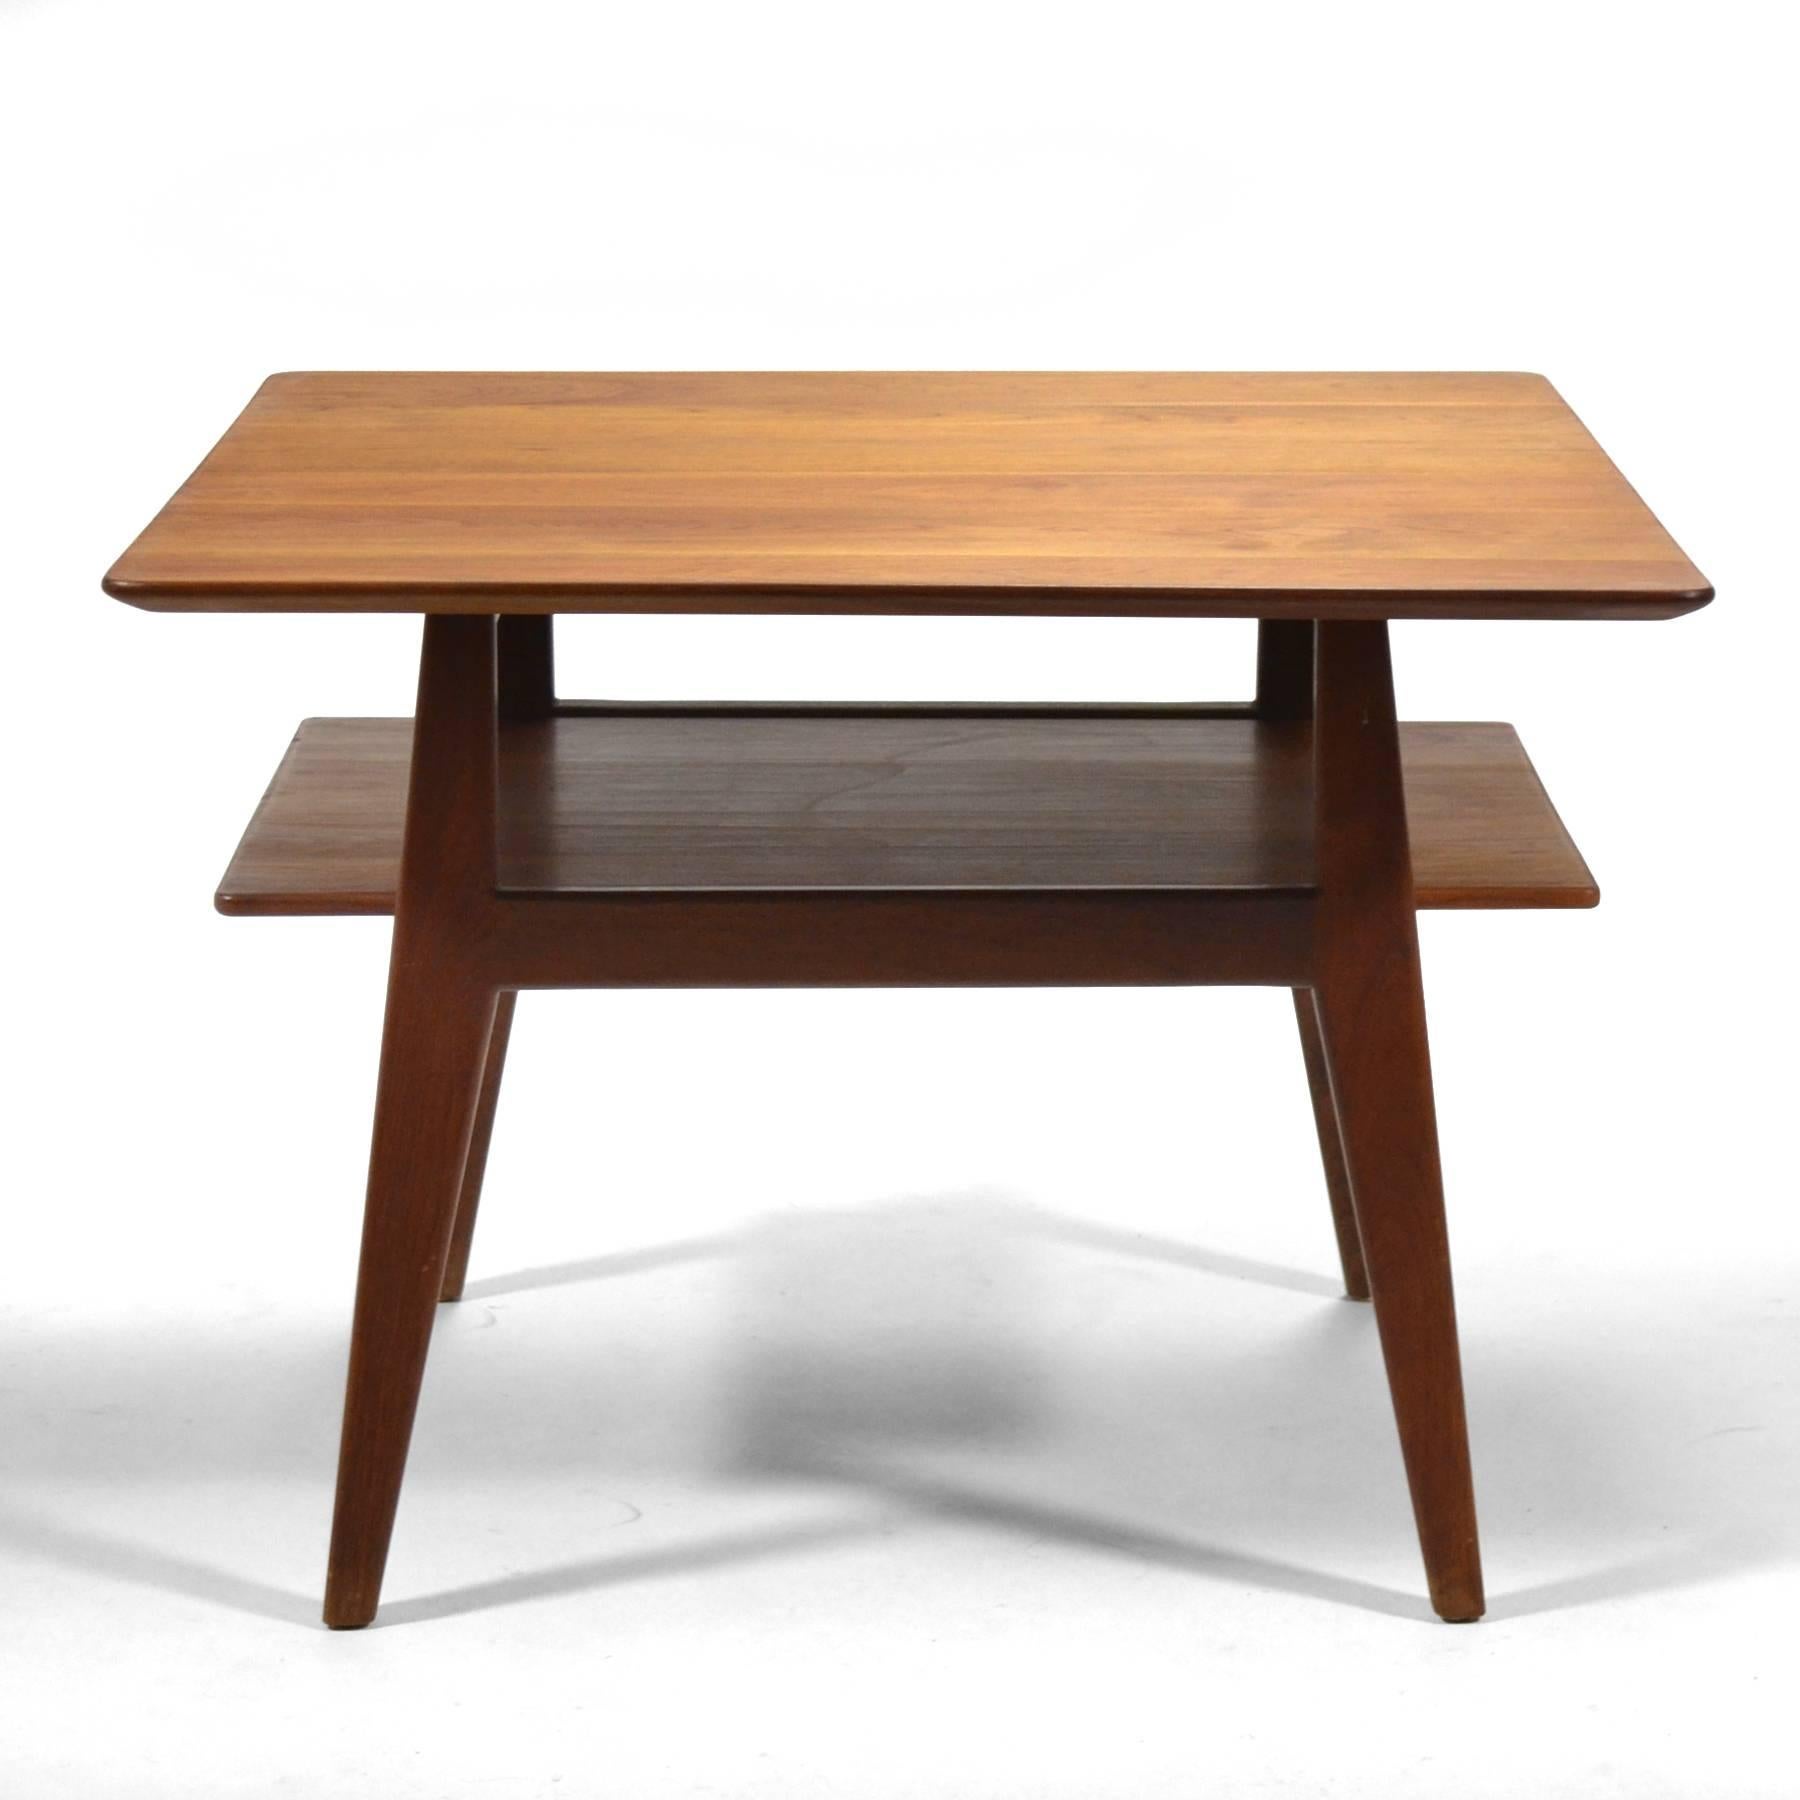 A beautiful design by Jens Risom executed in solid walnut, this early model 433 table has wonderful lines, a lower shelf, and a top with a deeply beveled edge.

 